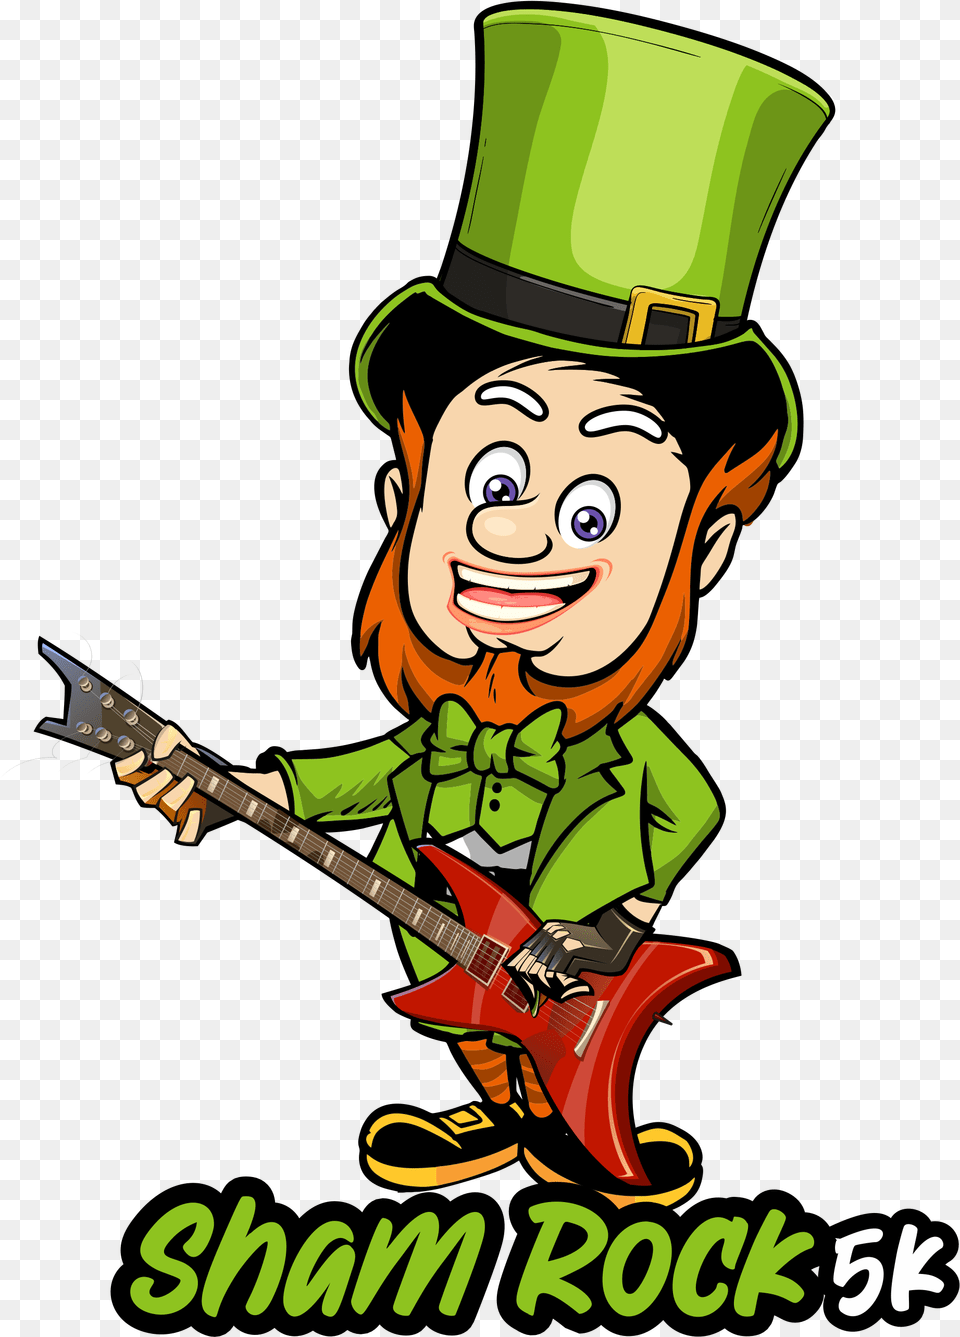 New In 2020 Introducting The Shamrock 5k Cartoon, Guitar, Musical Instrument, Person, Face Png Image